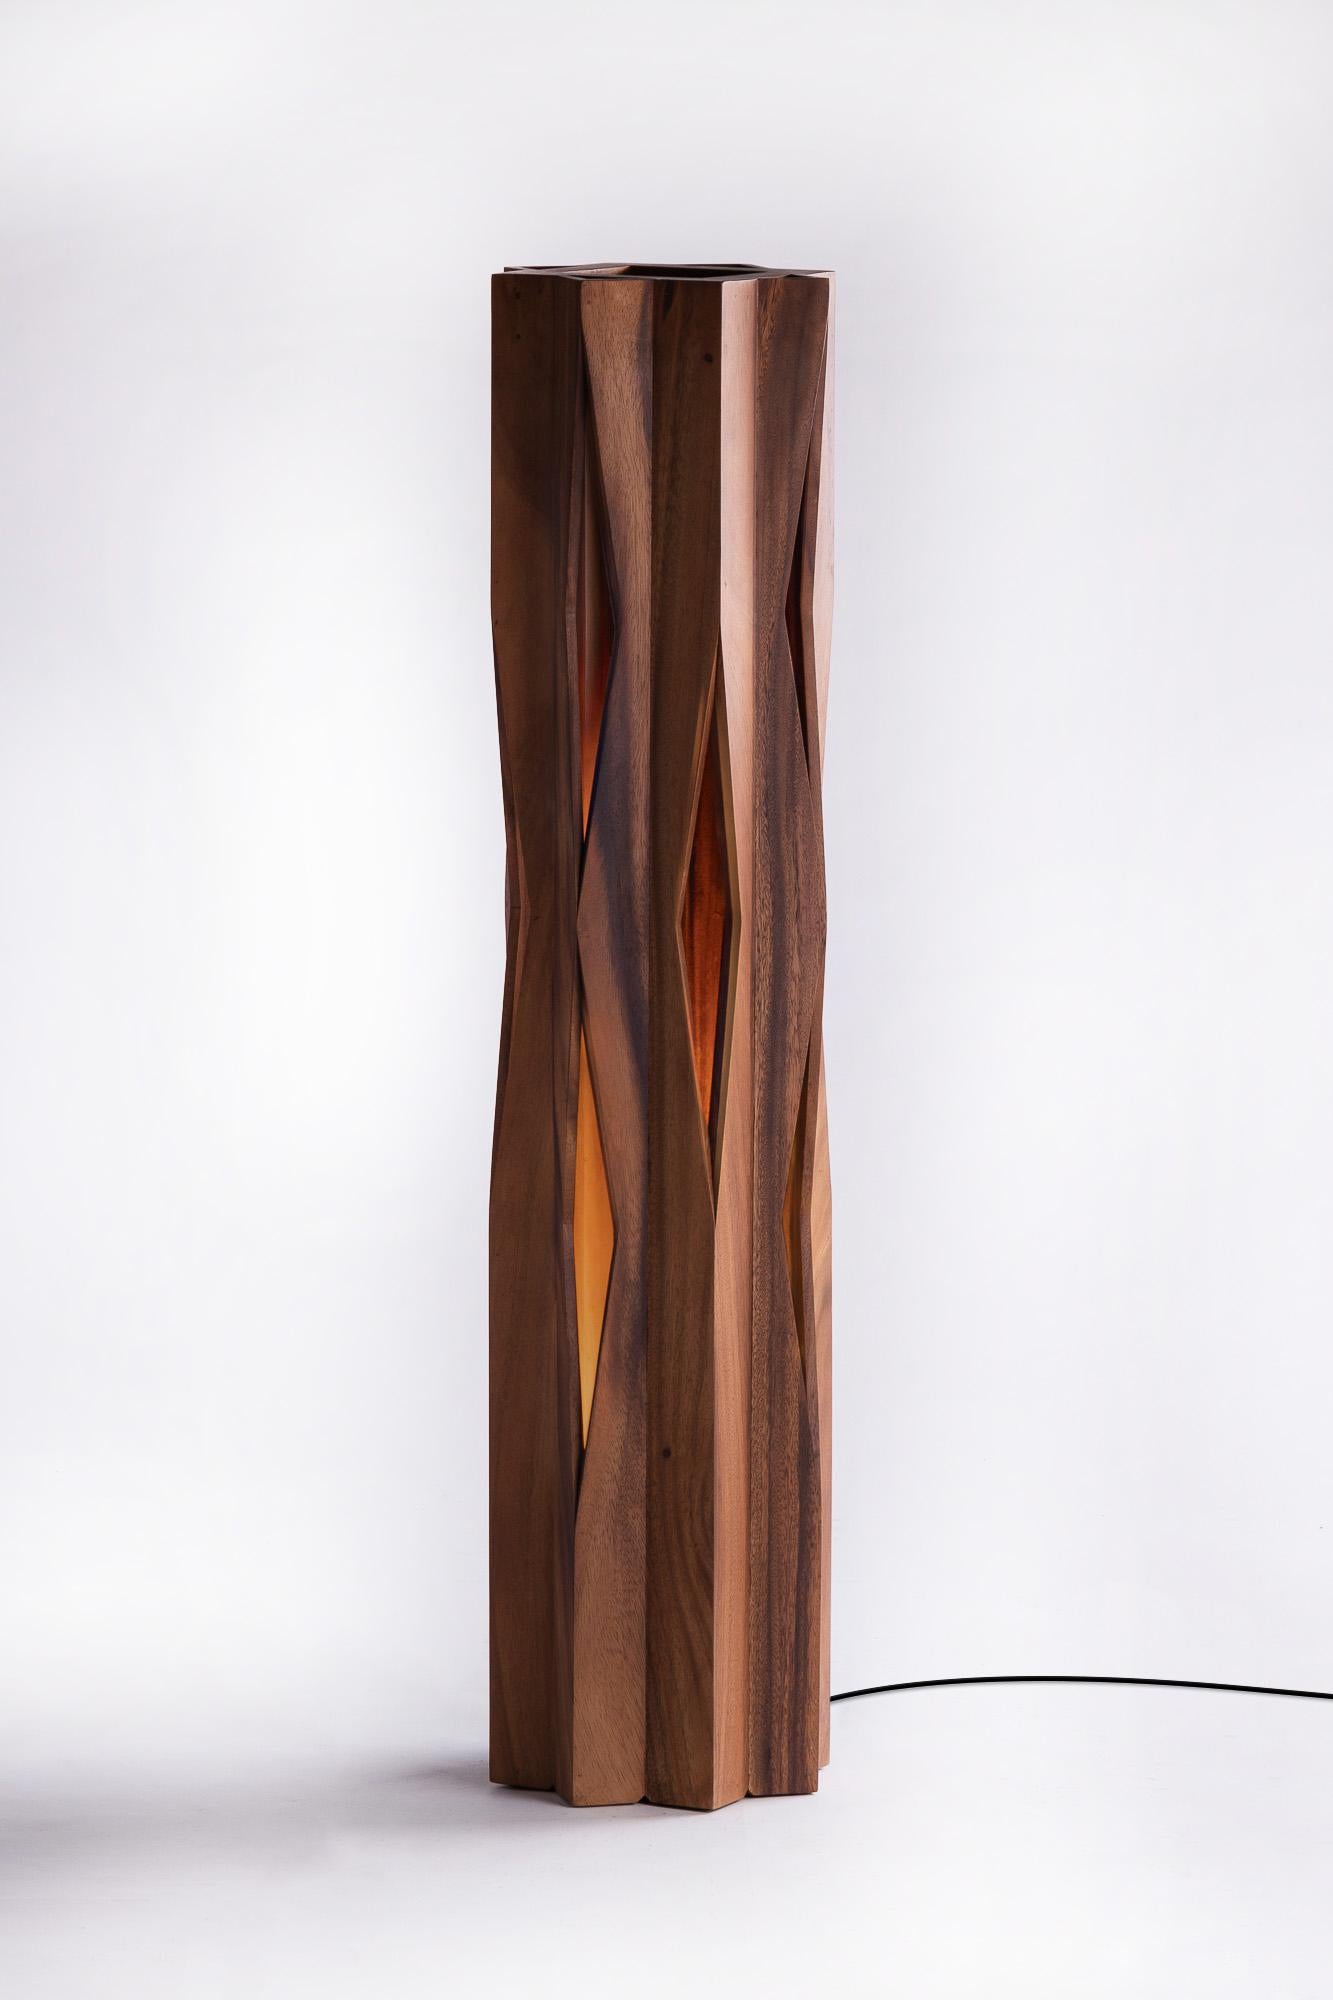 The Groove floor lamp features interesting patterns on wood ridges which are simply joined together with unusual angles. The results are light gaps, which makes the lamp a captivating piece and bring a sculptural touch and liveliness to any